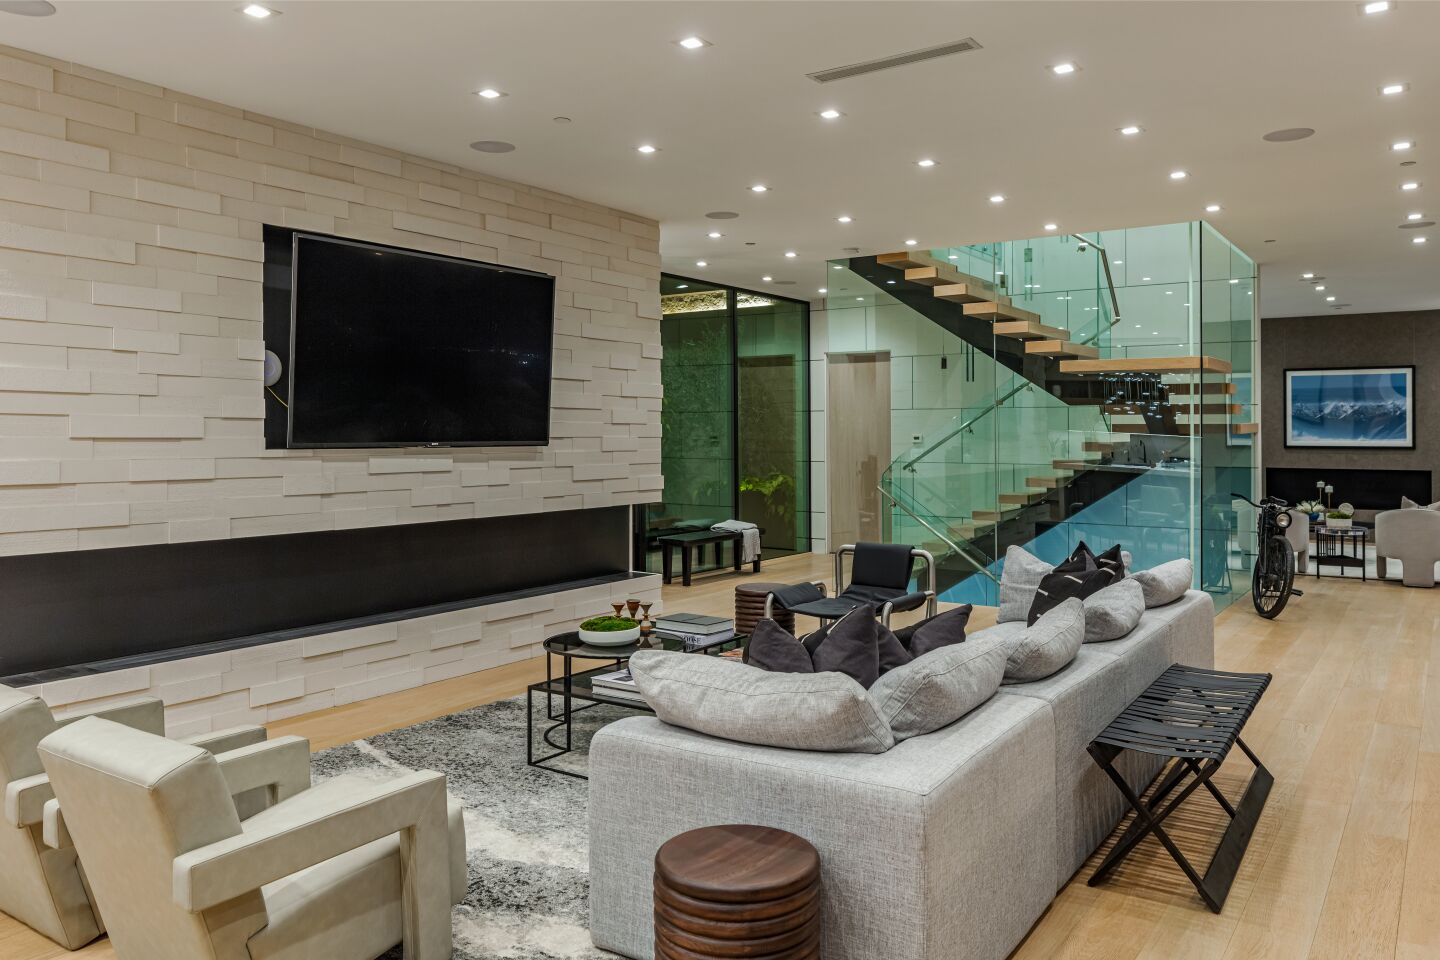 The living room has a built-in TV, furniture, a floating stairway and track lighting.